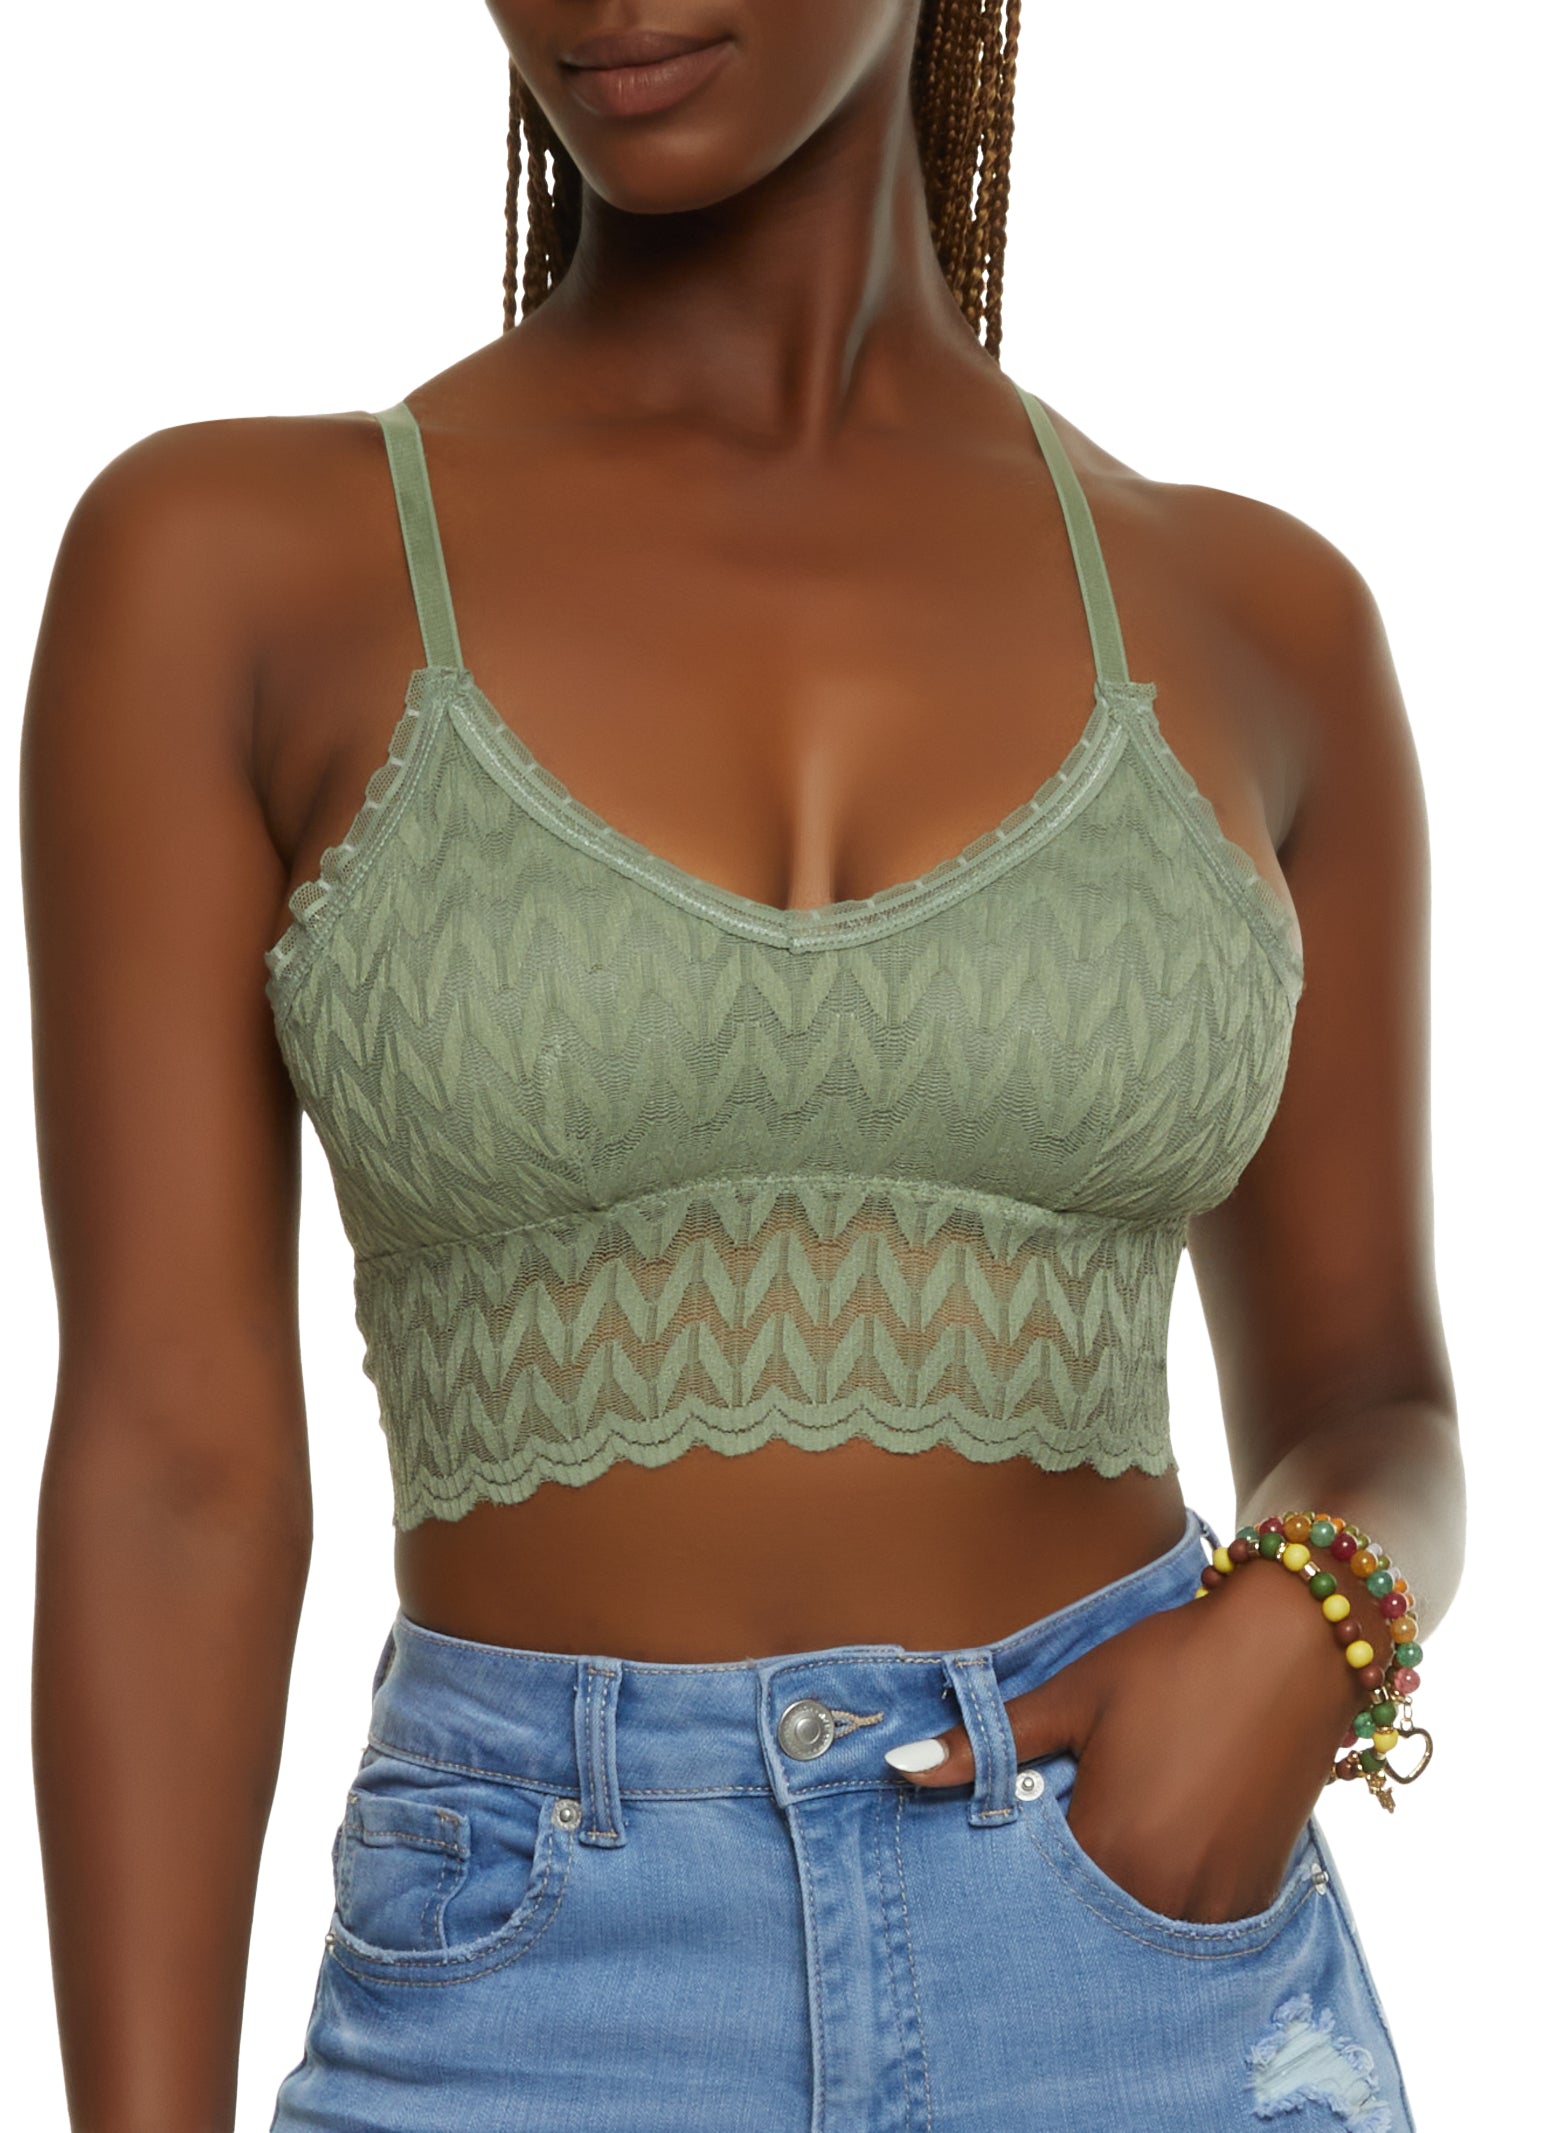 Rainbow Shops Womens Scalloped Trim Lace Bralette Top, Green, Size